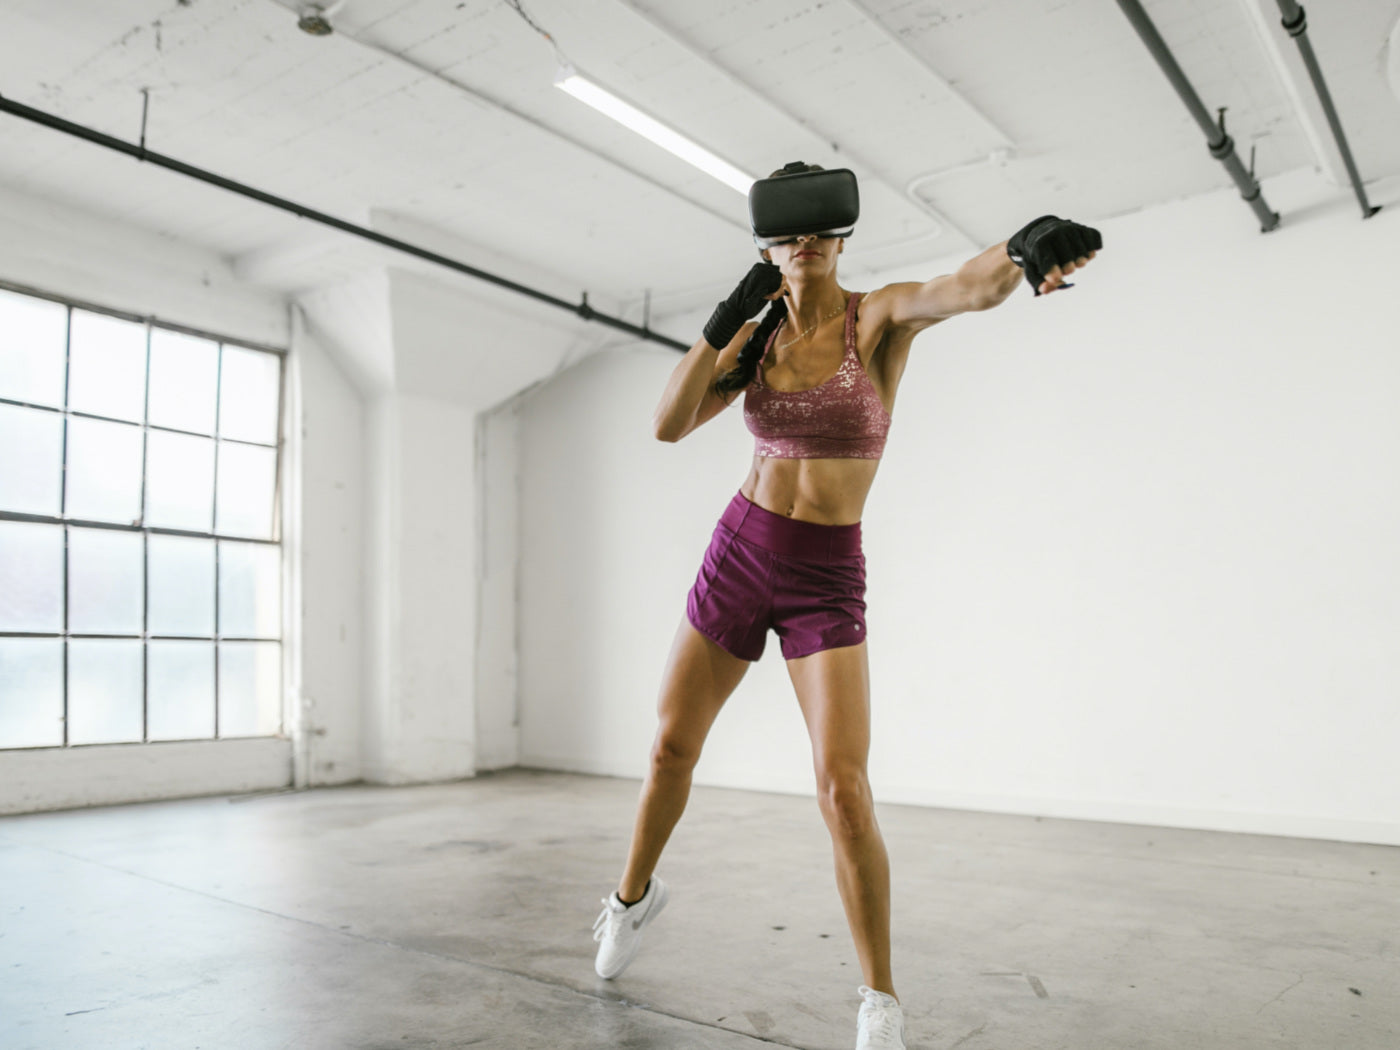 Best Boxing VR Games - Step Into The Virtual Ring